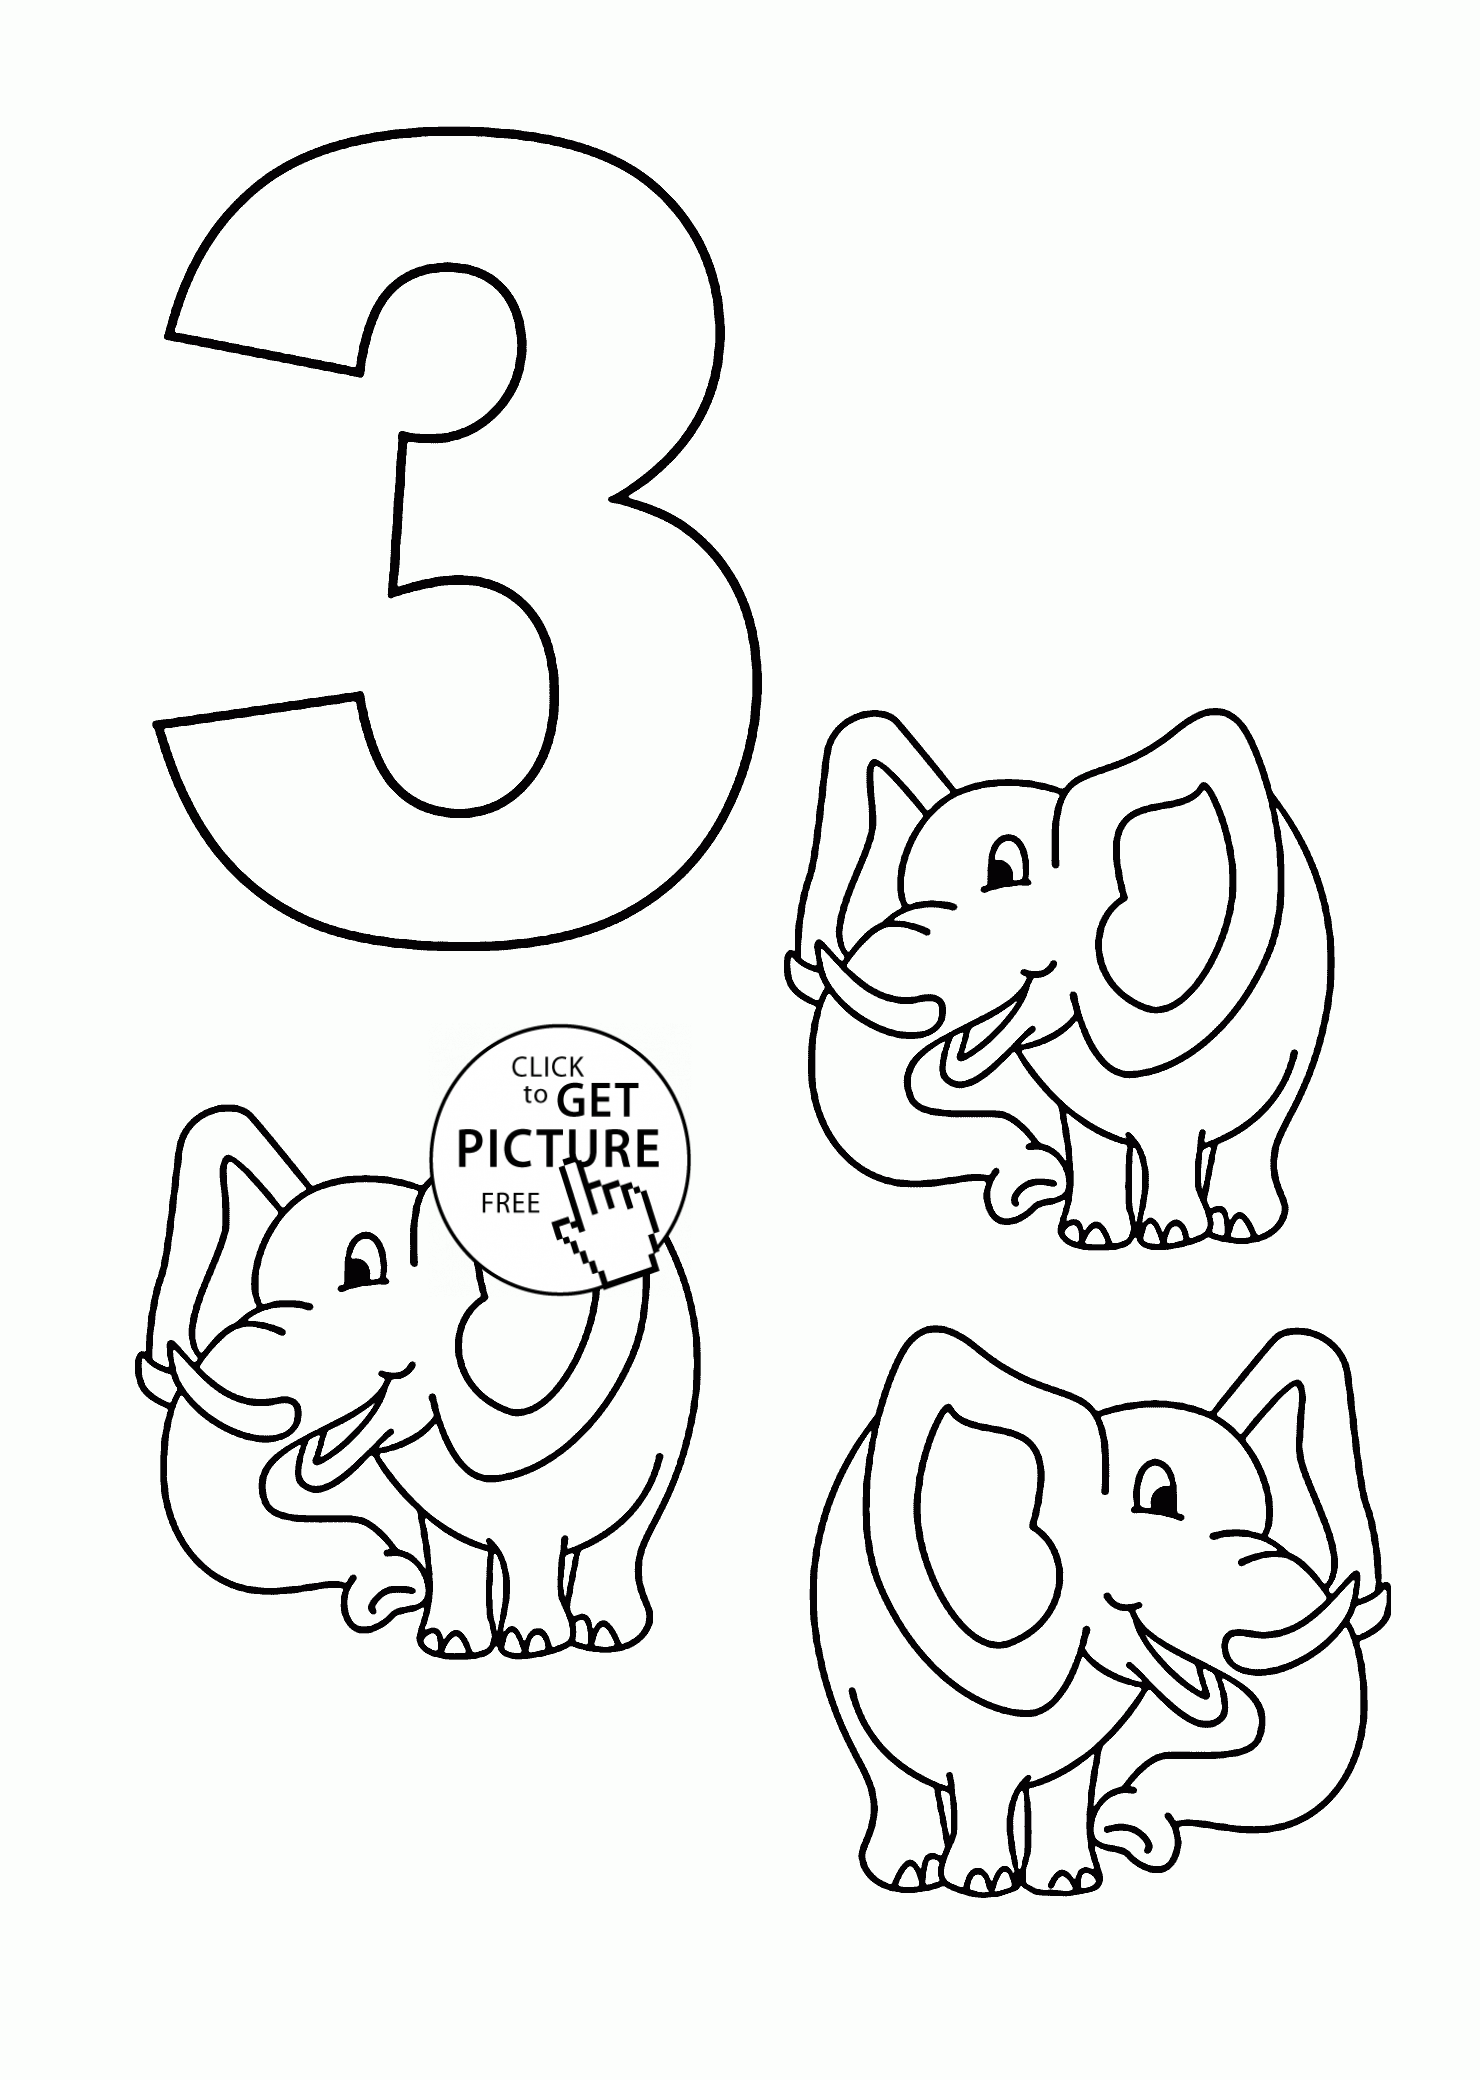 number-1-5-coloring-page-numbers-free-printable-templates-coloring